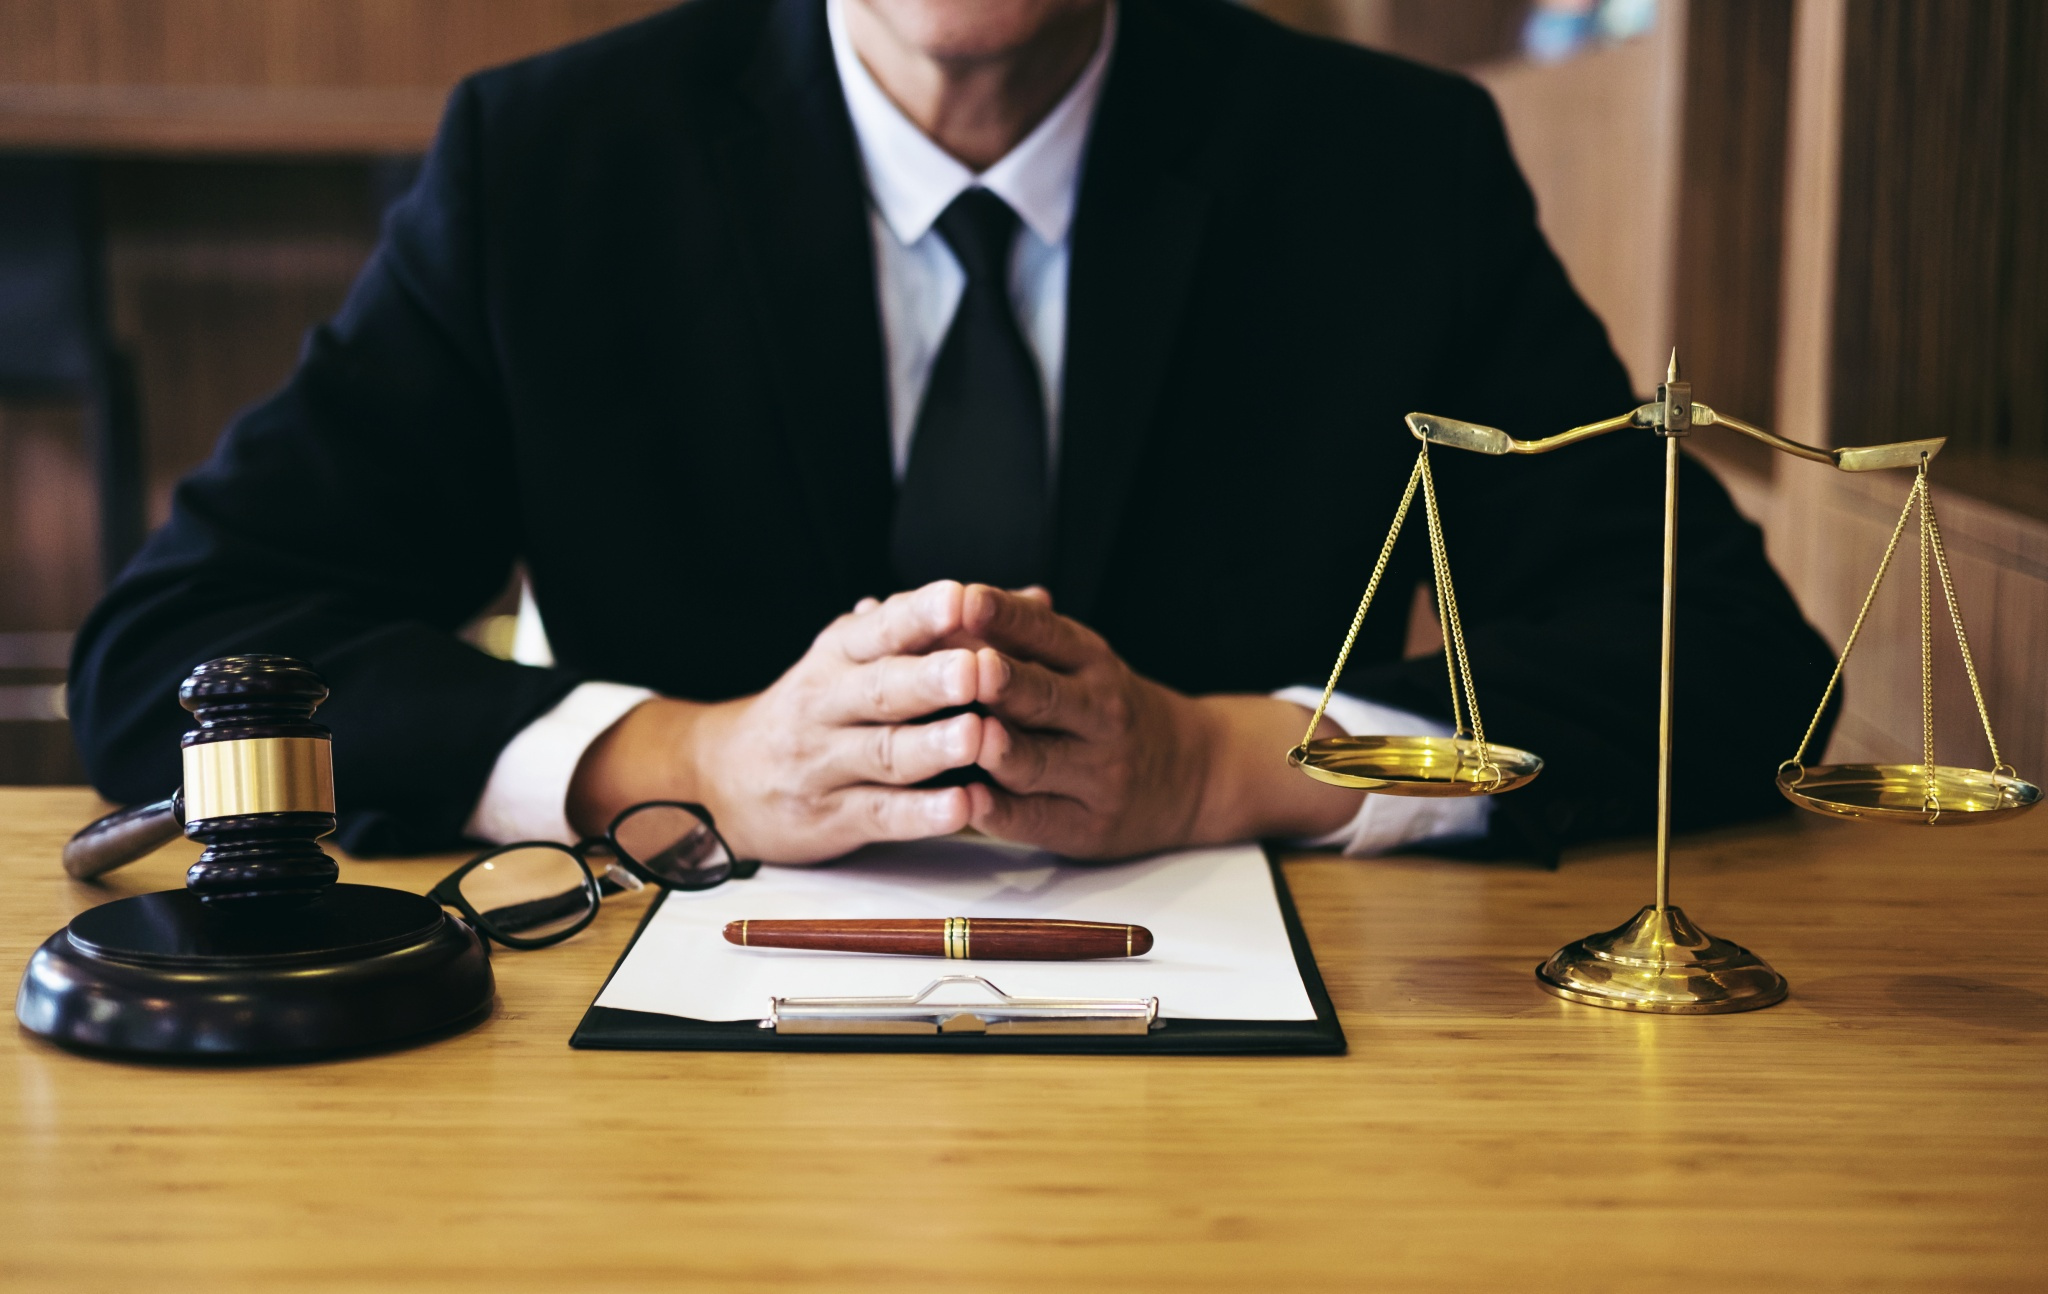 How to Become a Good Lawyer